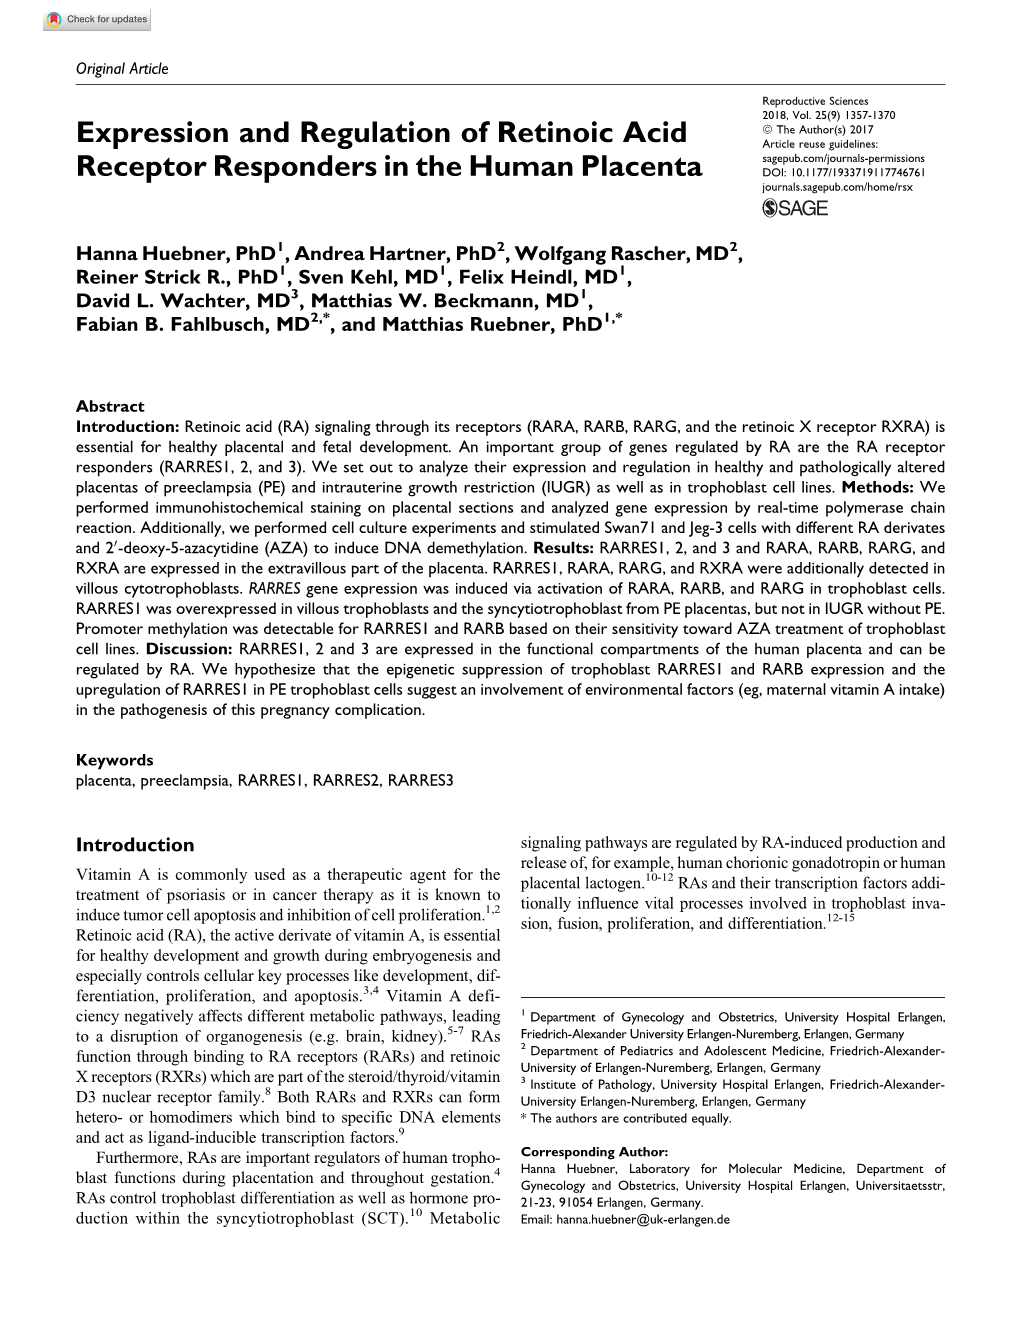 Expression and Regulation of Retinoic Acid Receptor Responders in The